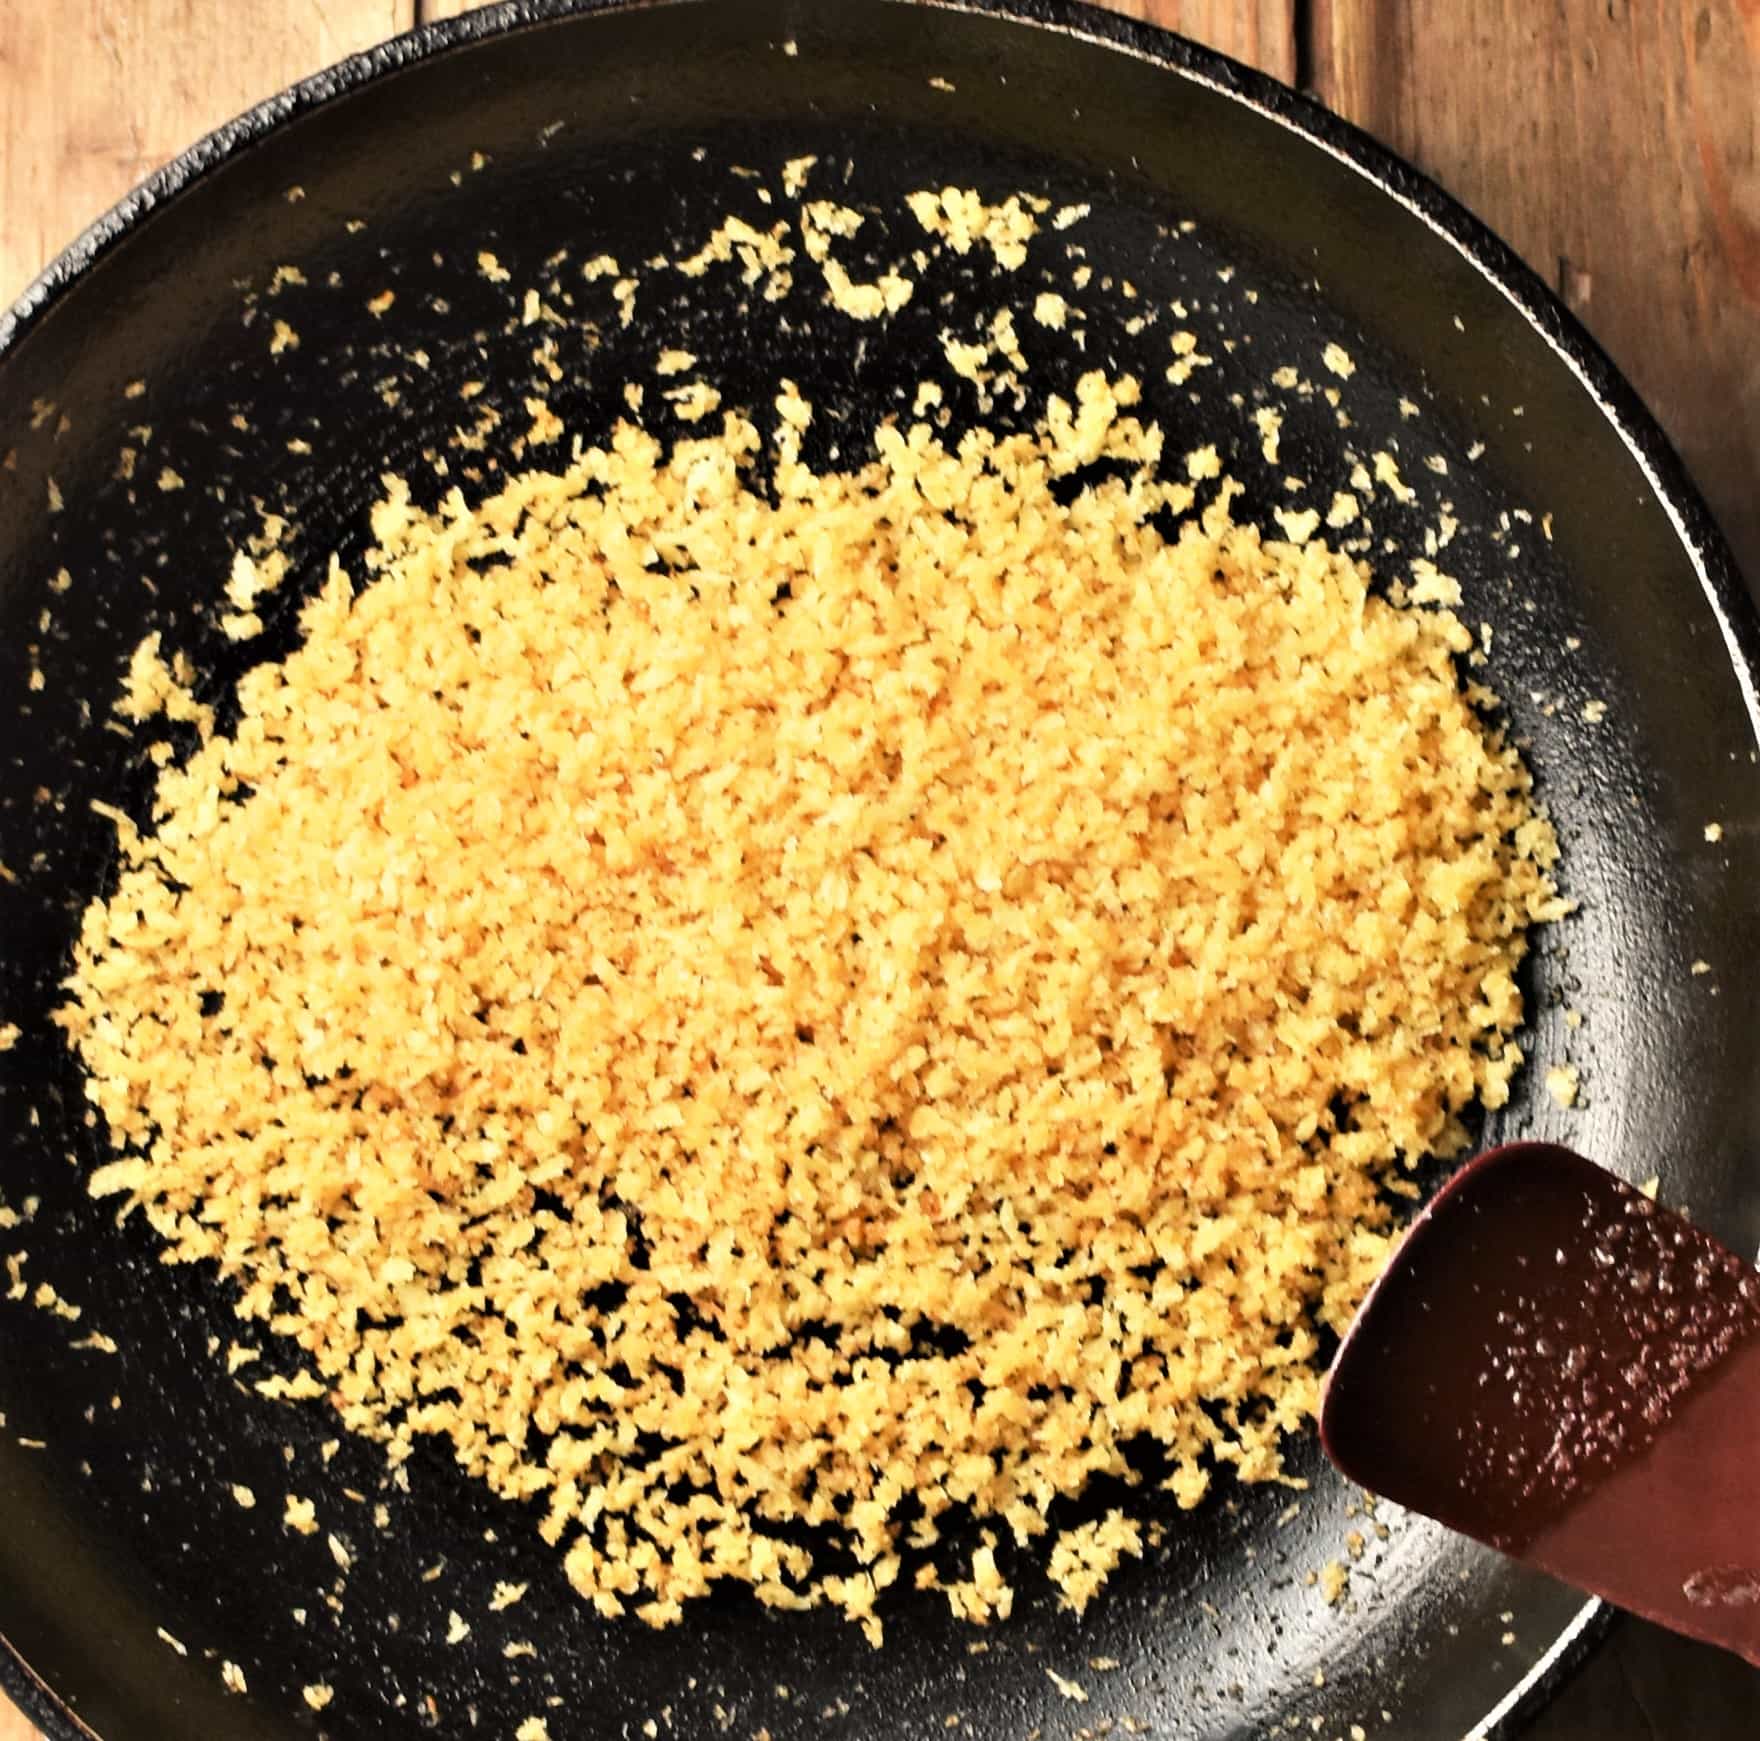 Top down view of toasted panko breadcrumbs in skillet with spatula in bottom right corner.